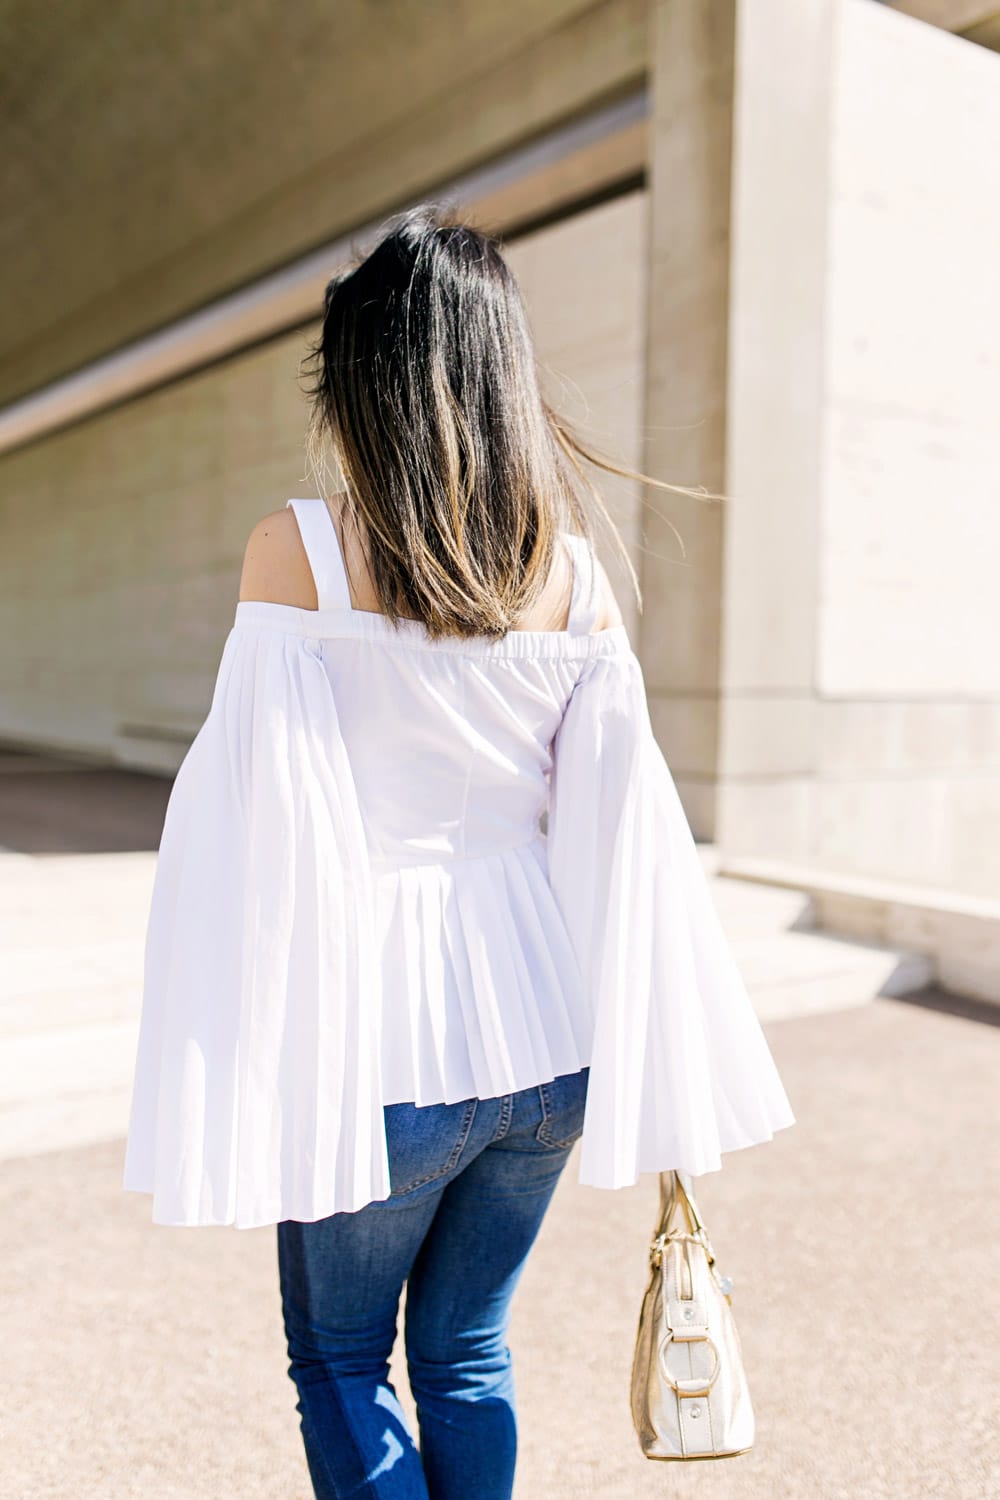 charles youssef pleated off the shoulder top with lele sadoughi windchime earrings and whbm tuxedo jeans